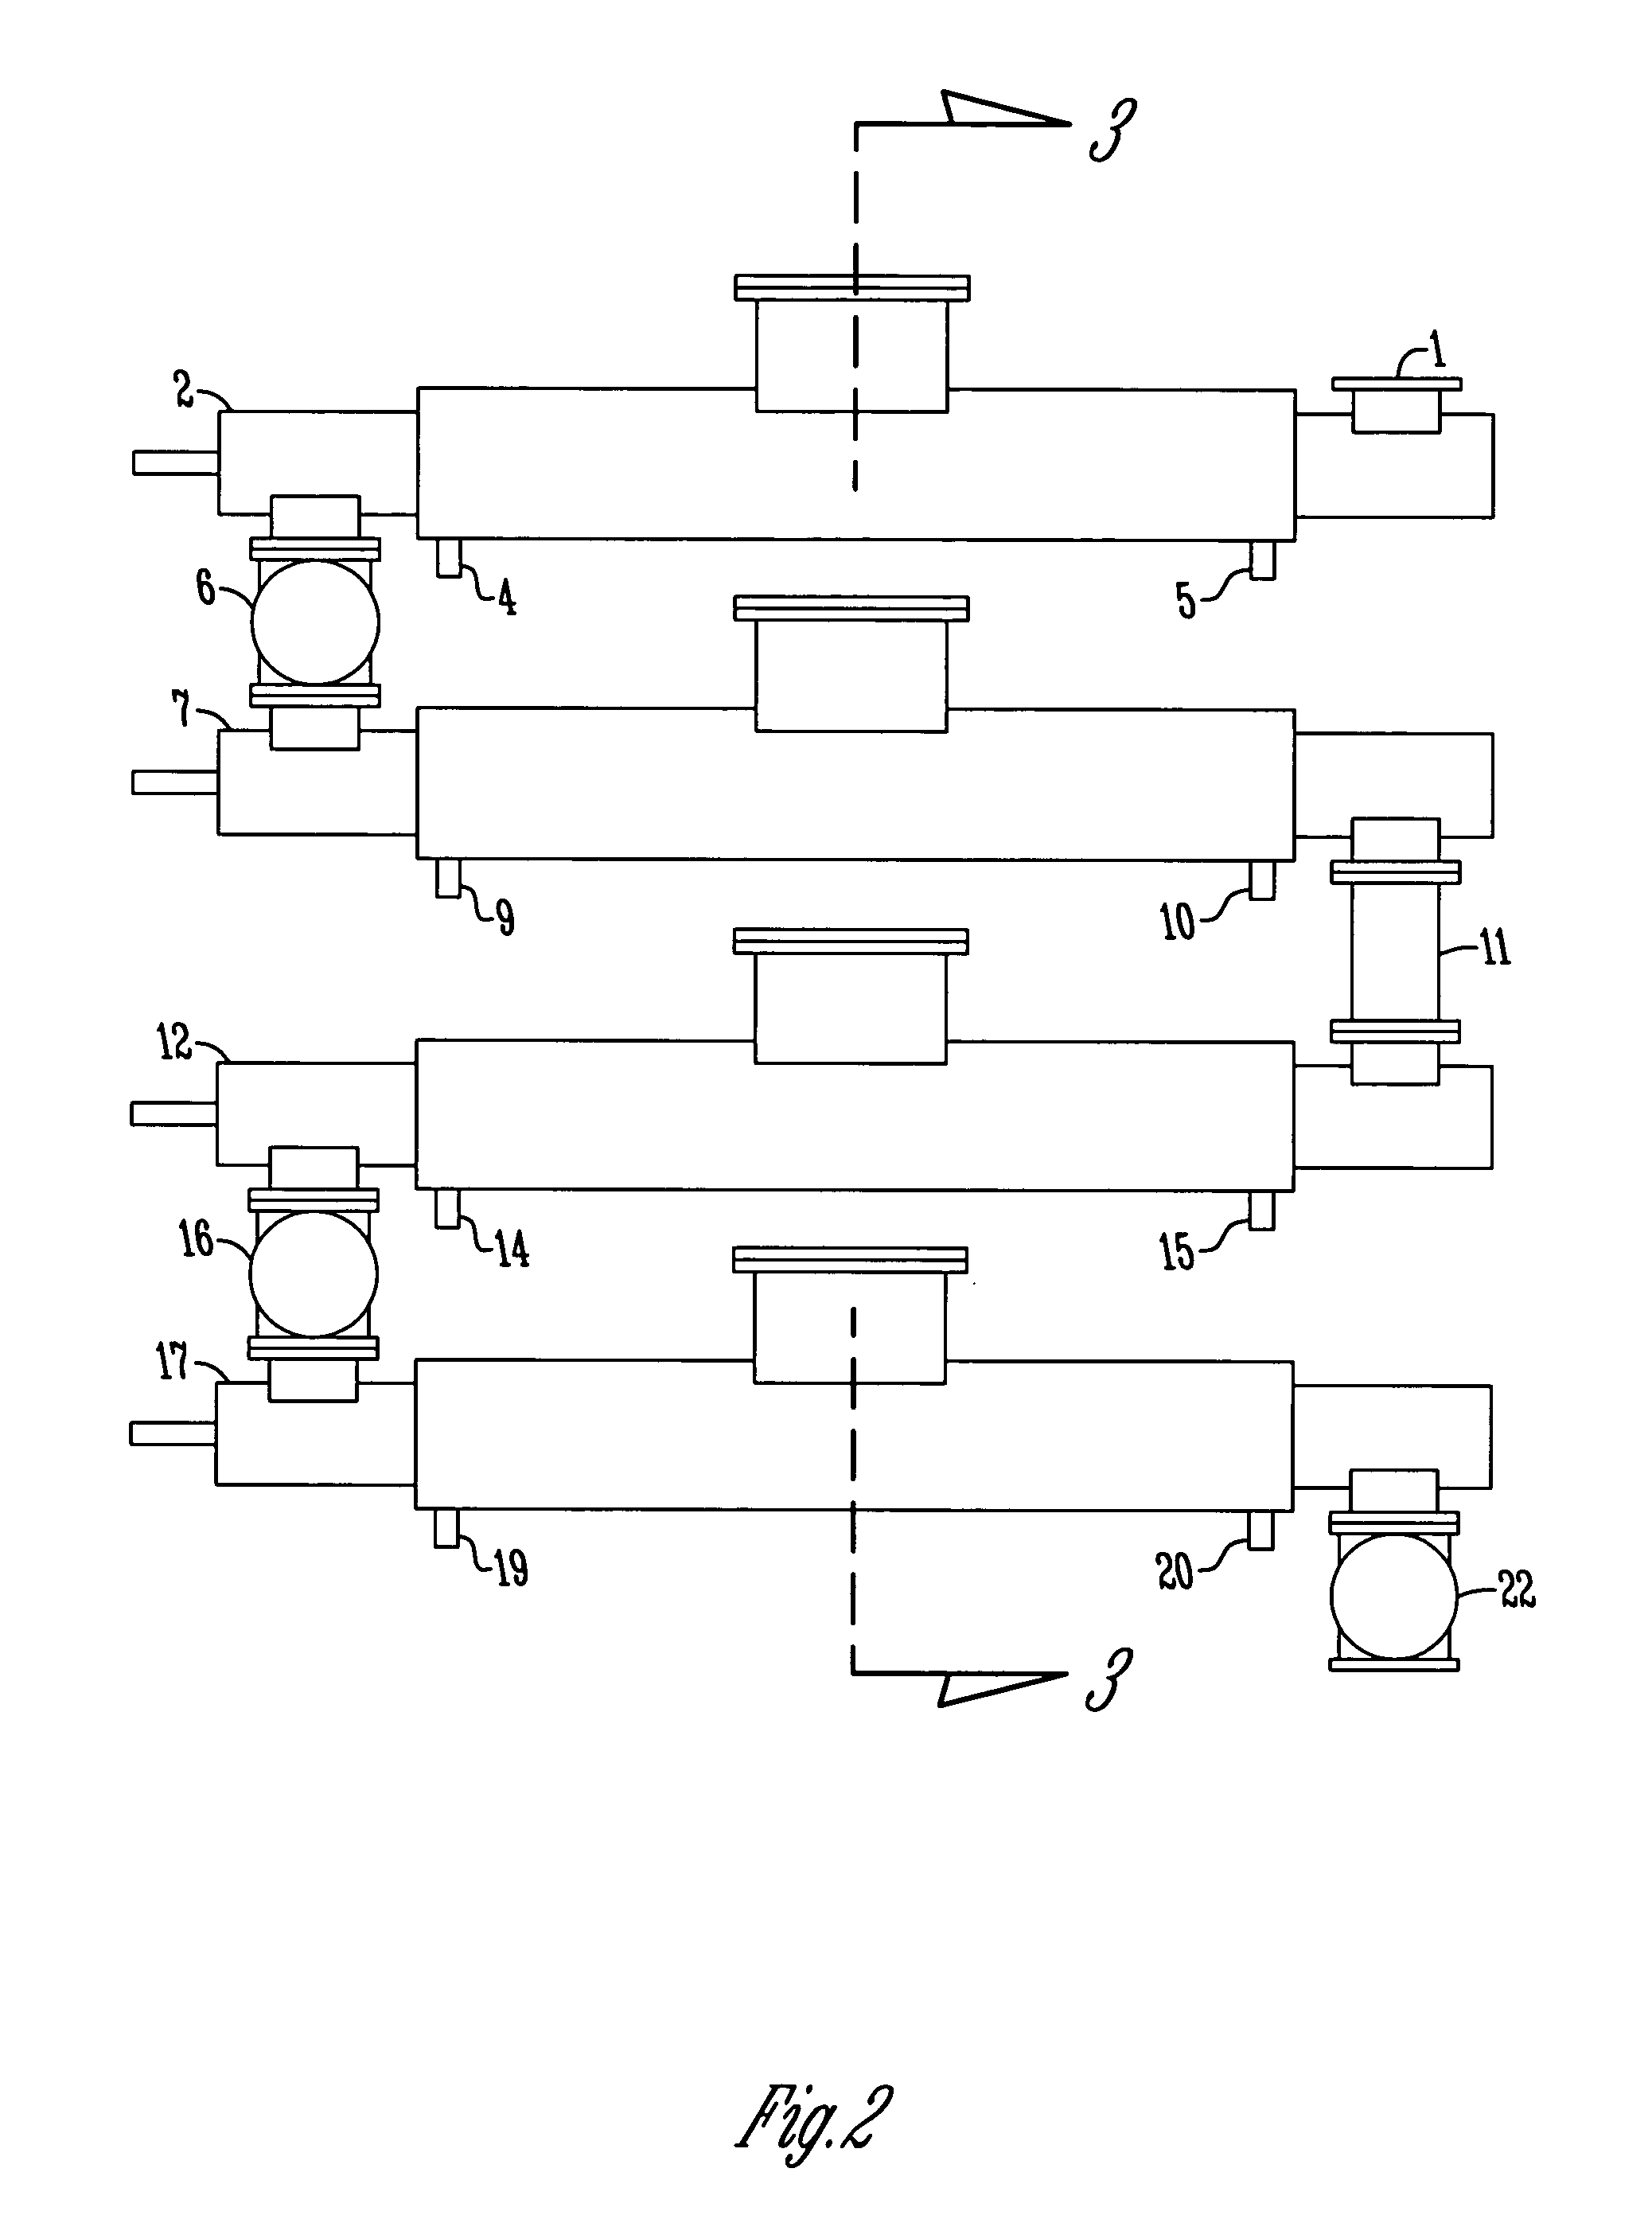 Method of separating and converting hydrocarbon composites and polymer materials